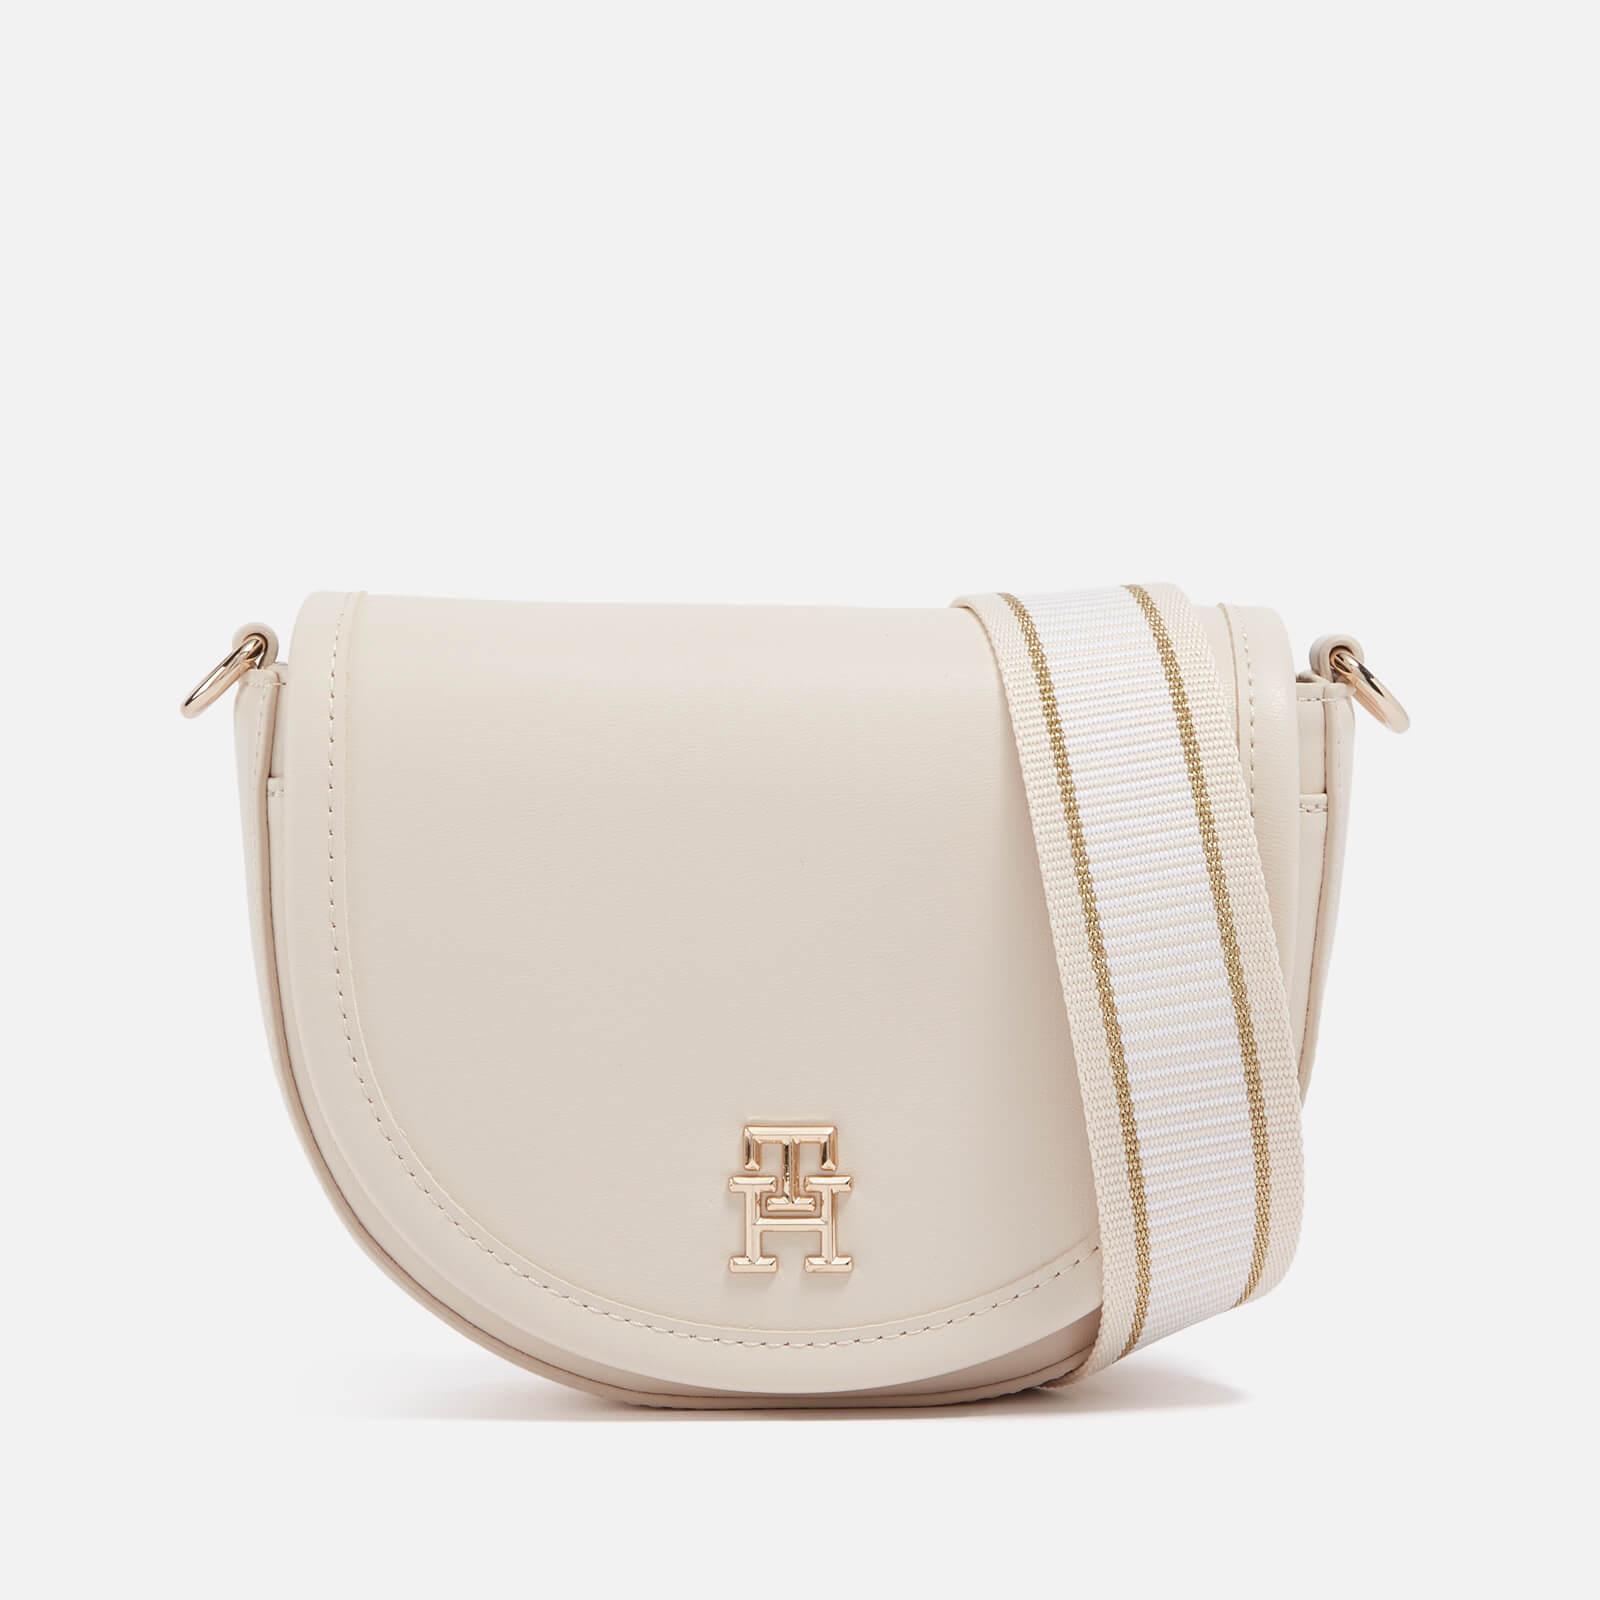 Tommy Hilfiger City Summer Faux Leather Saddle Bag in White | Lyst